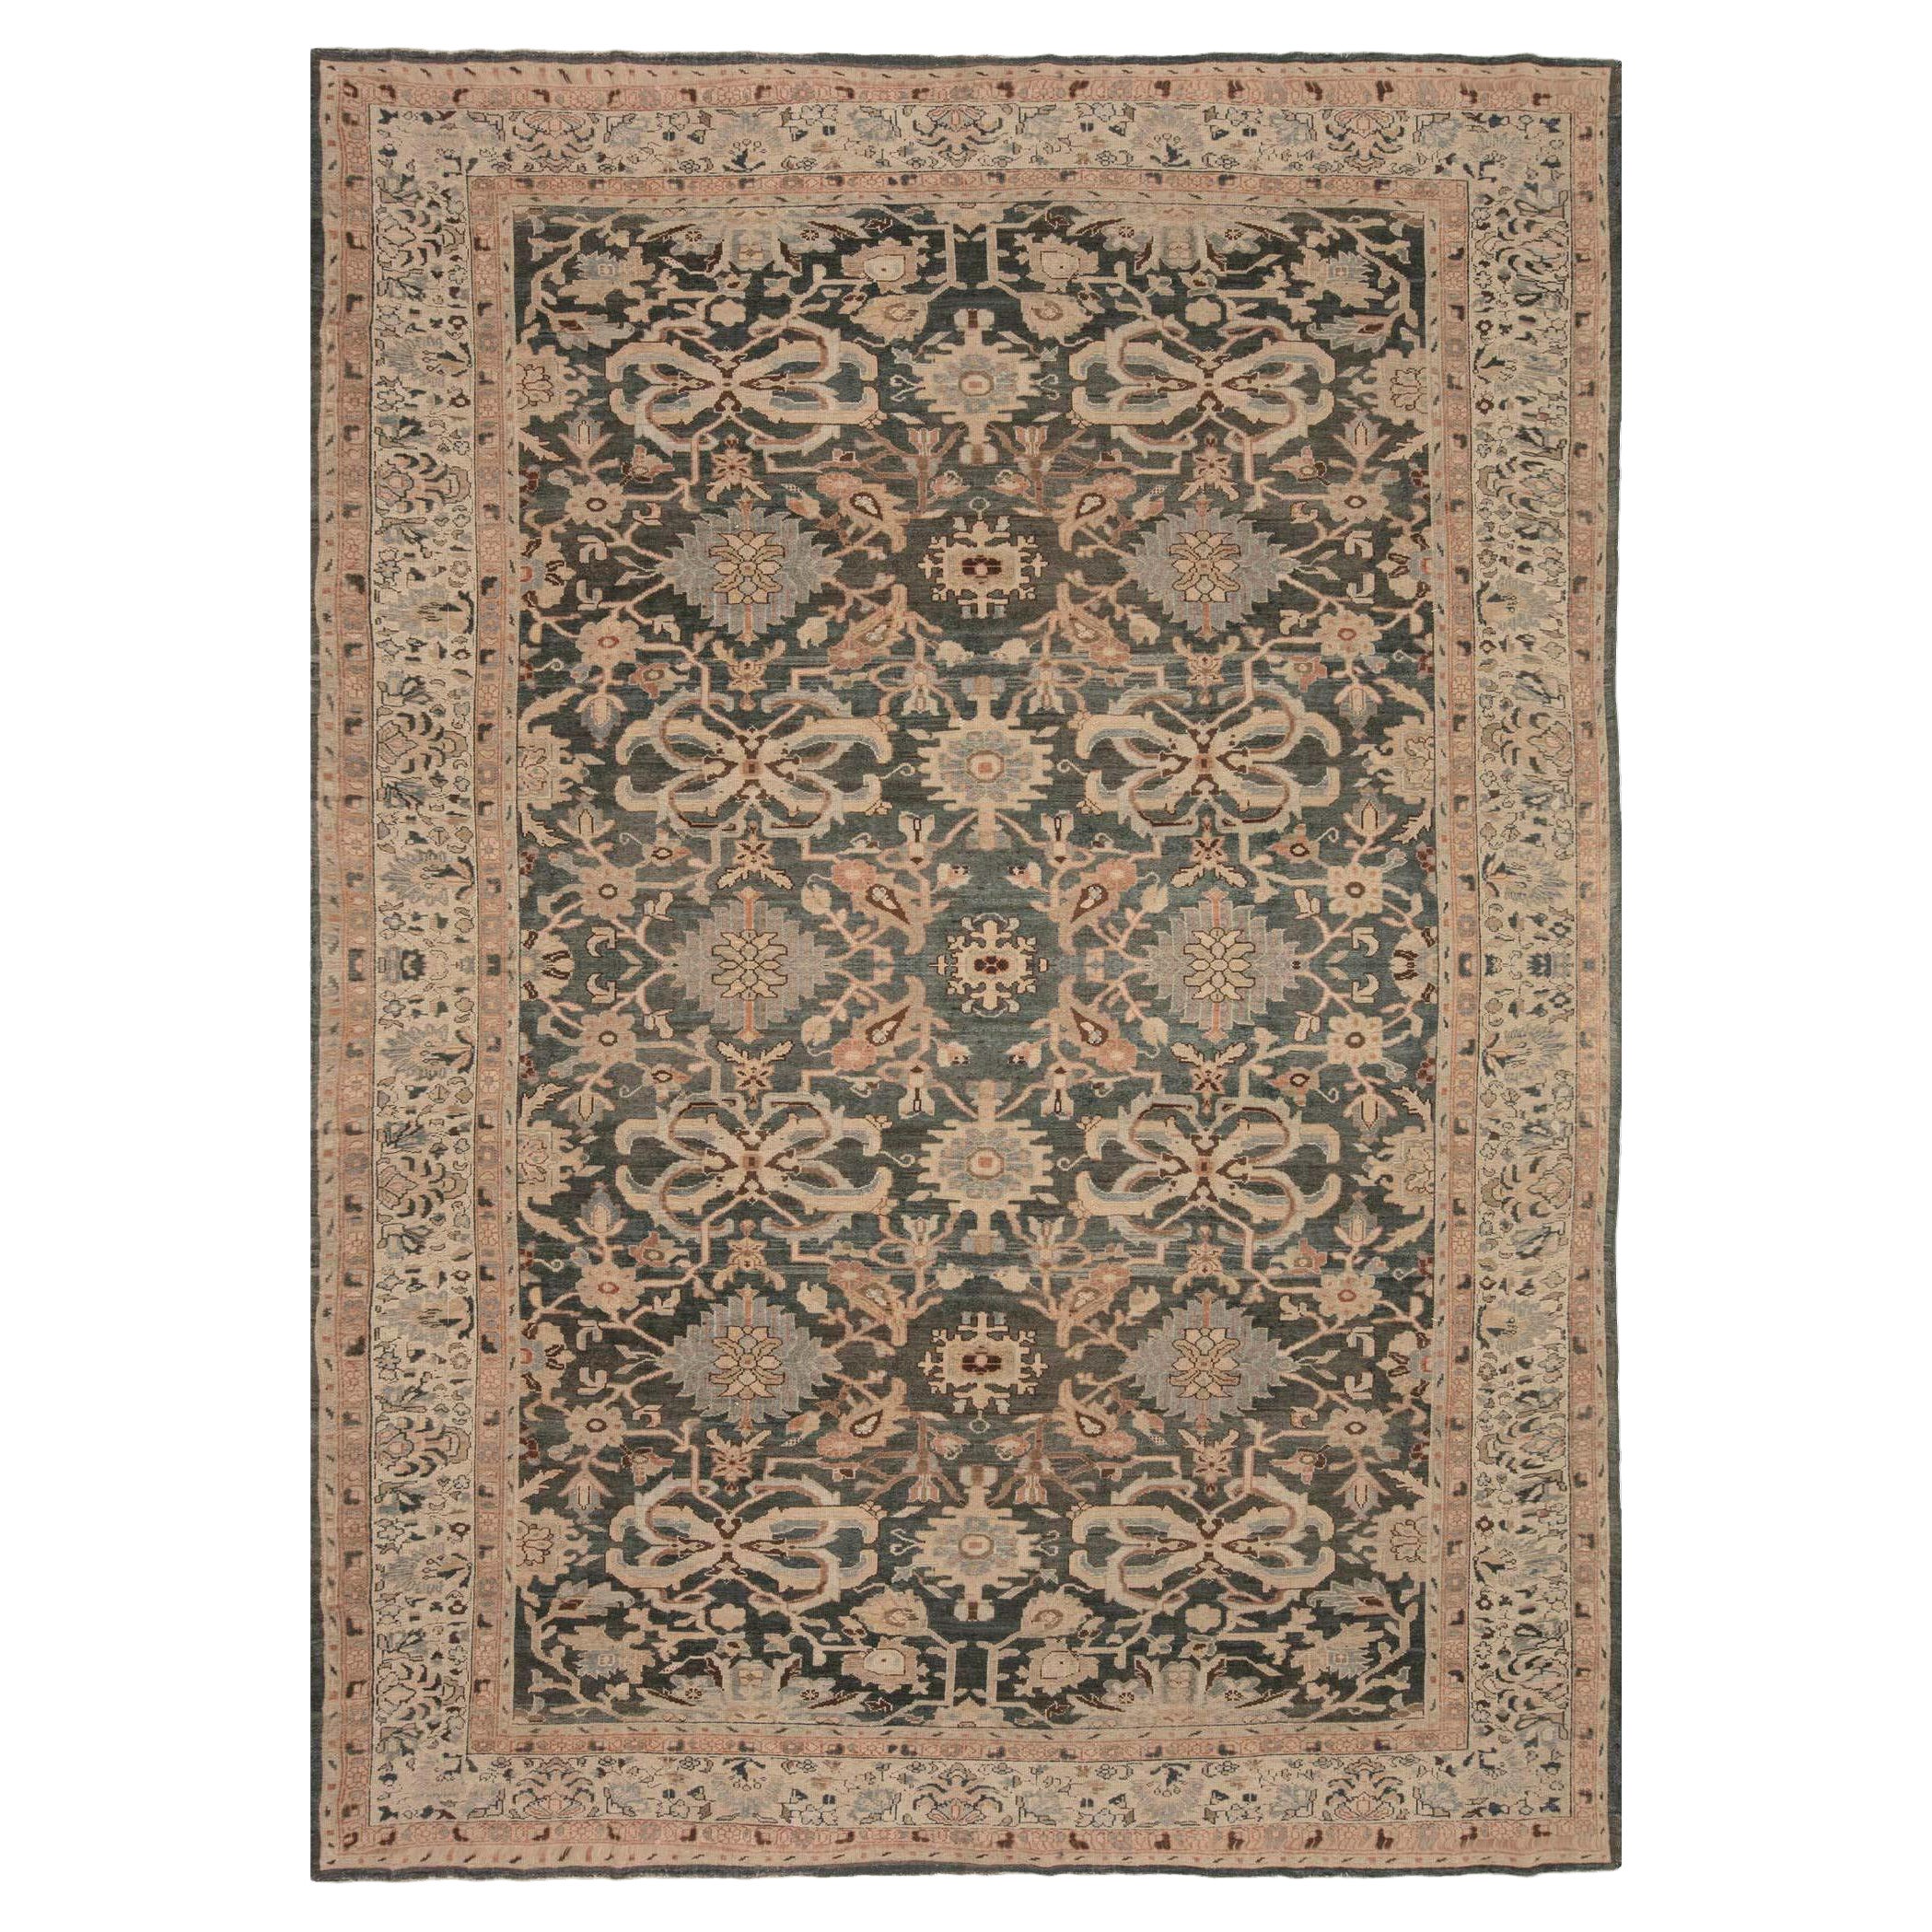 1920s Persian Sultanabad Handwoven Wool Rug